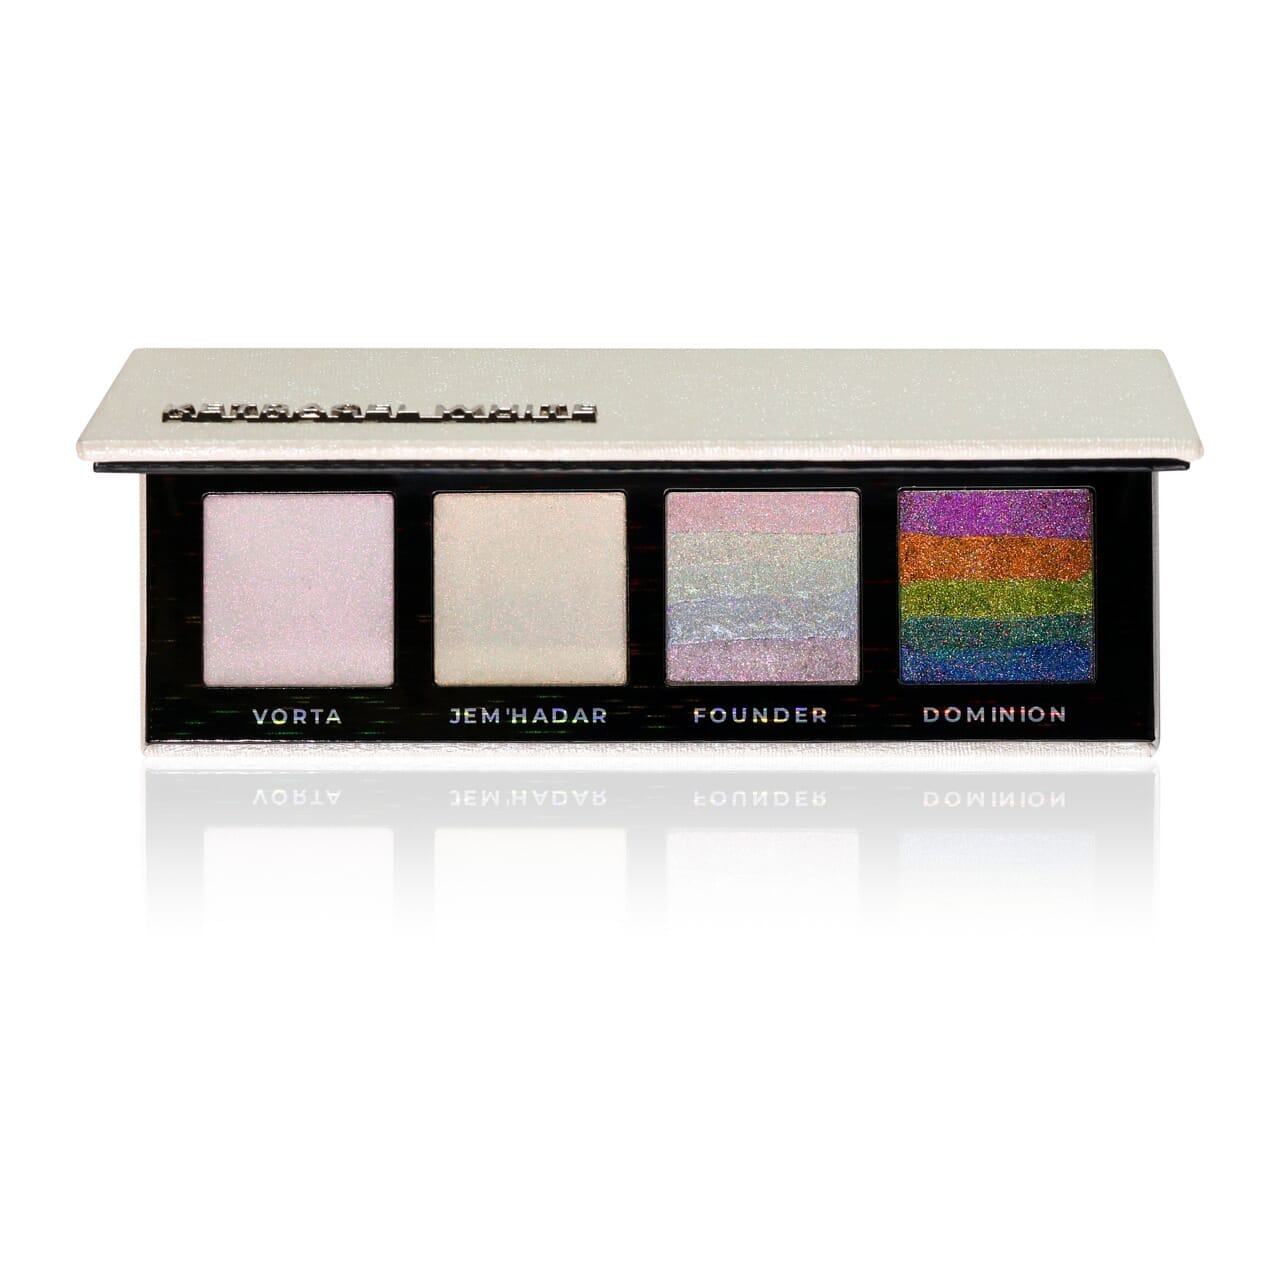 Ketracel White Multi Use Palette - Limited Edition